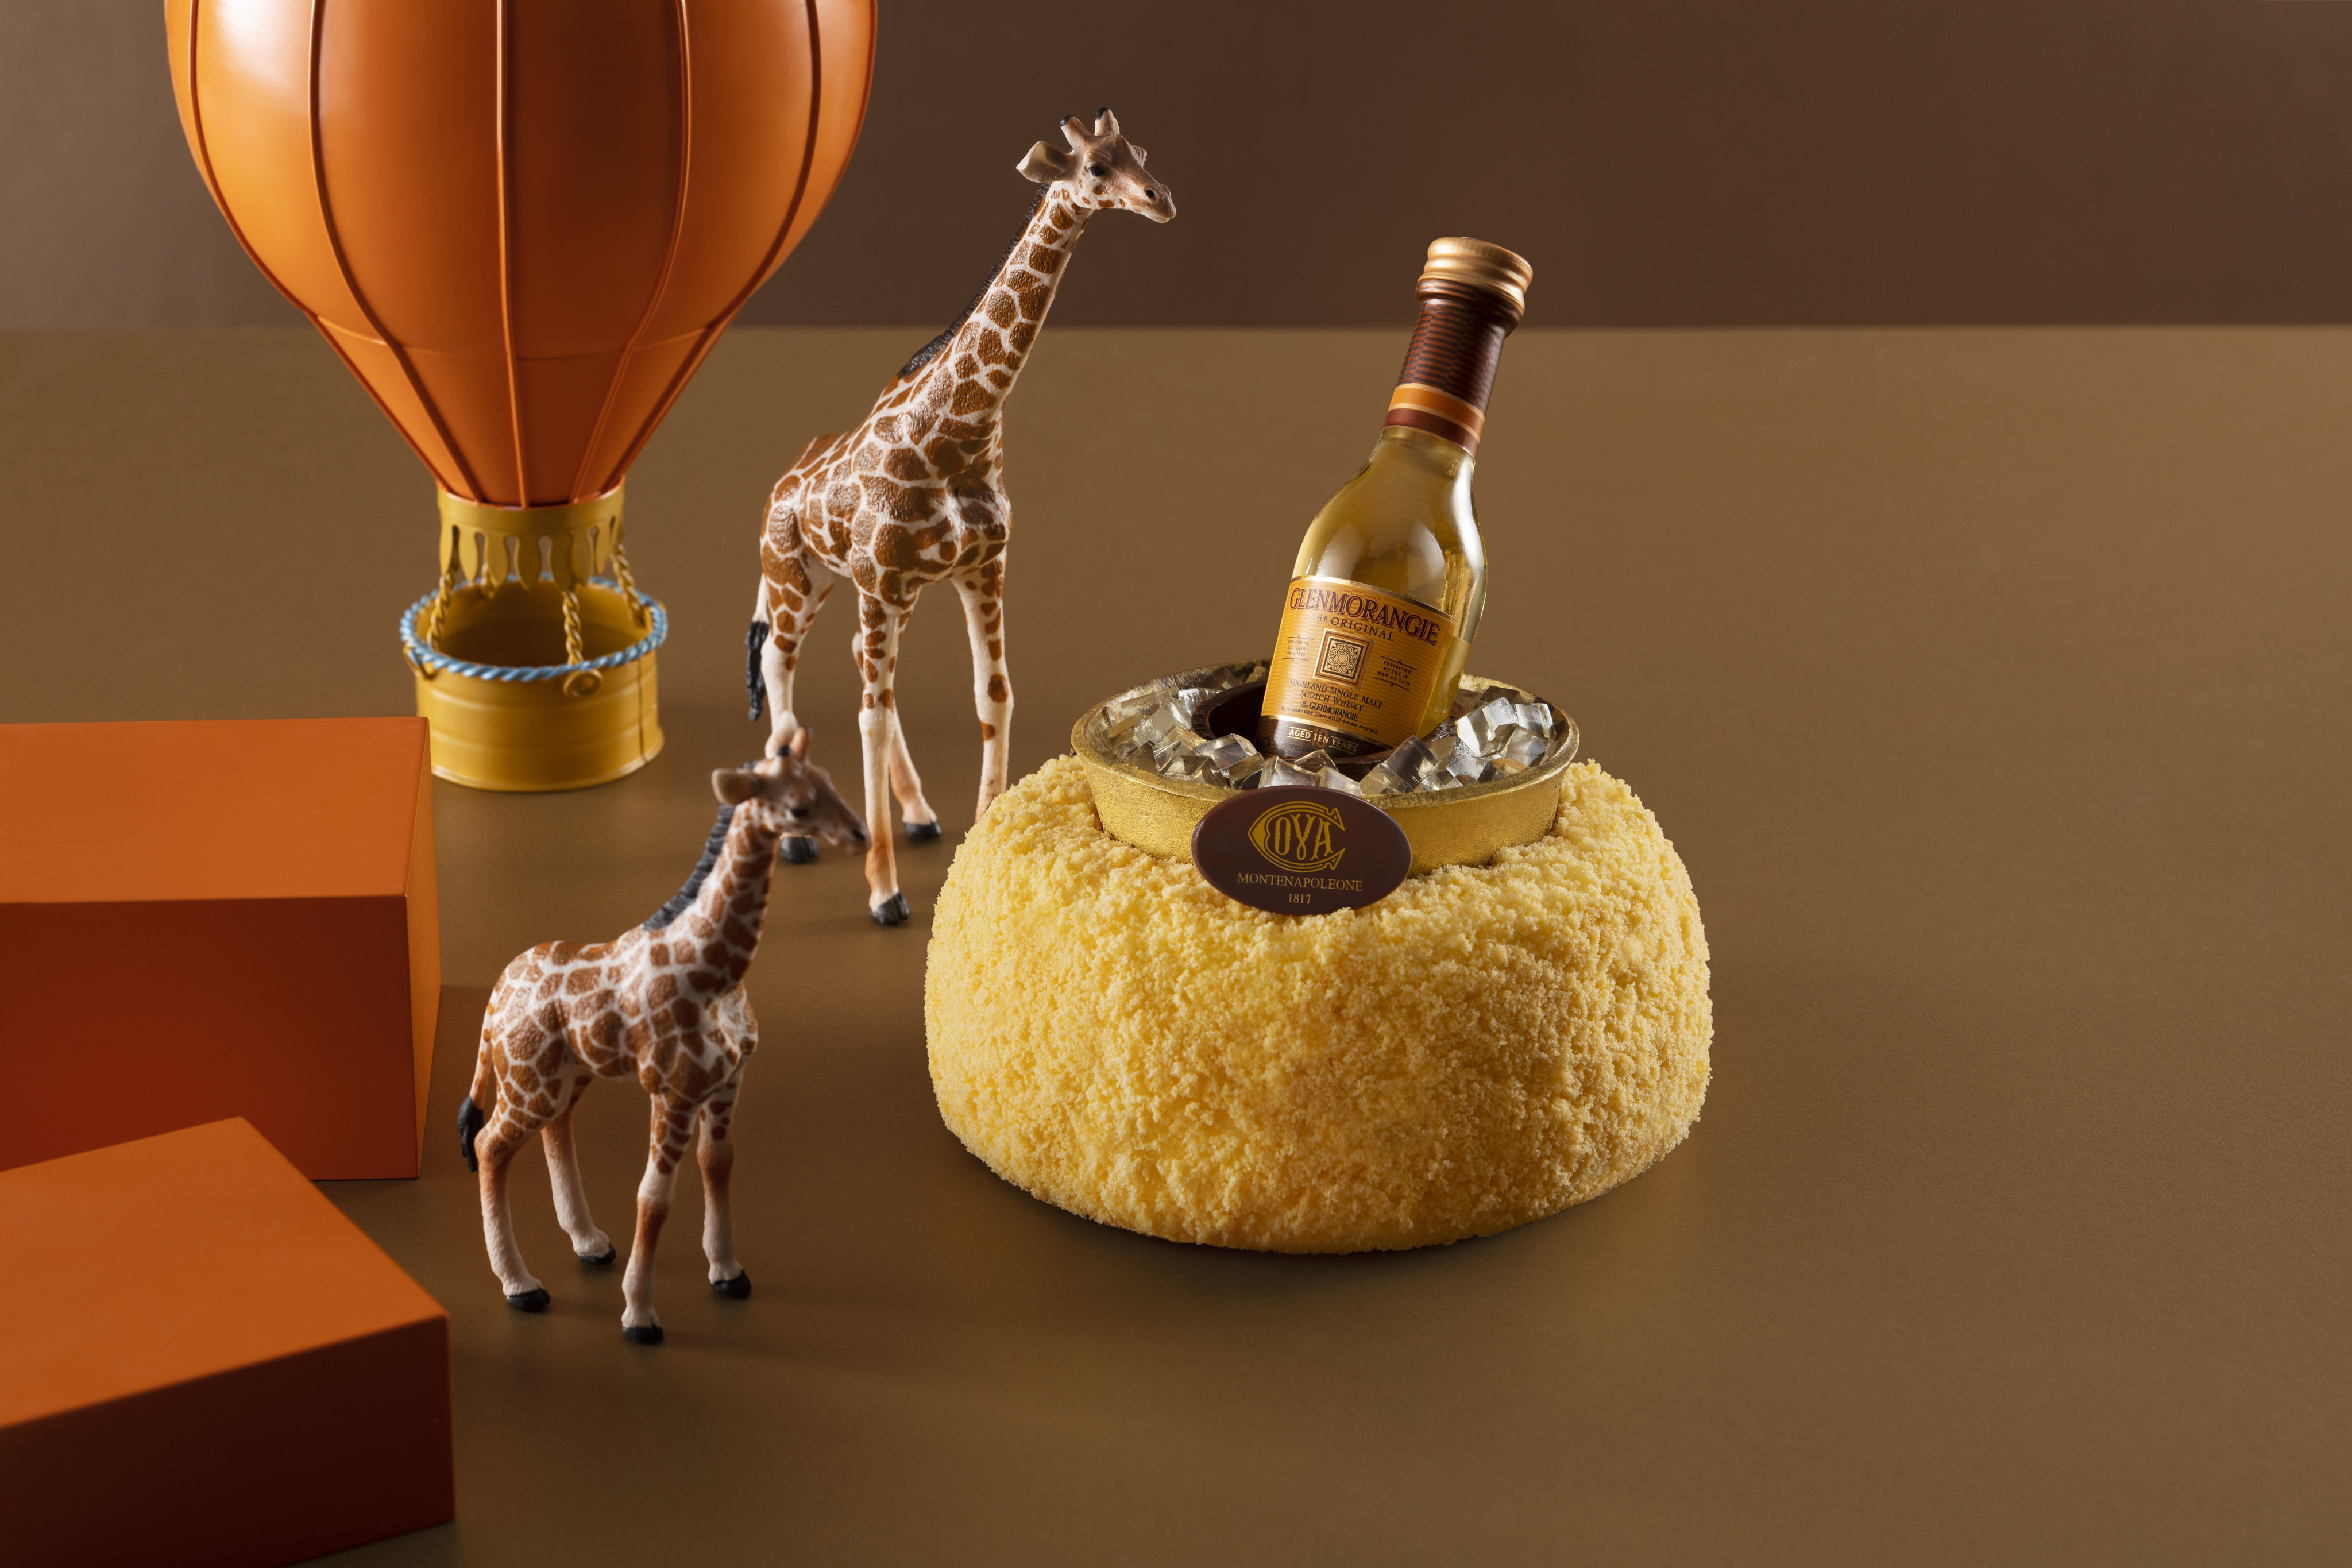 Italian pastry shop Cova has collaborated with whisky brand Glenmorangie to offer two Father’s Day cakes this year in Hong Kong. The cakes are just one way to celebrate your dad in 2023. Photo: Glenmorangie